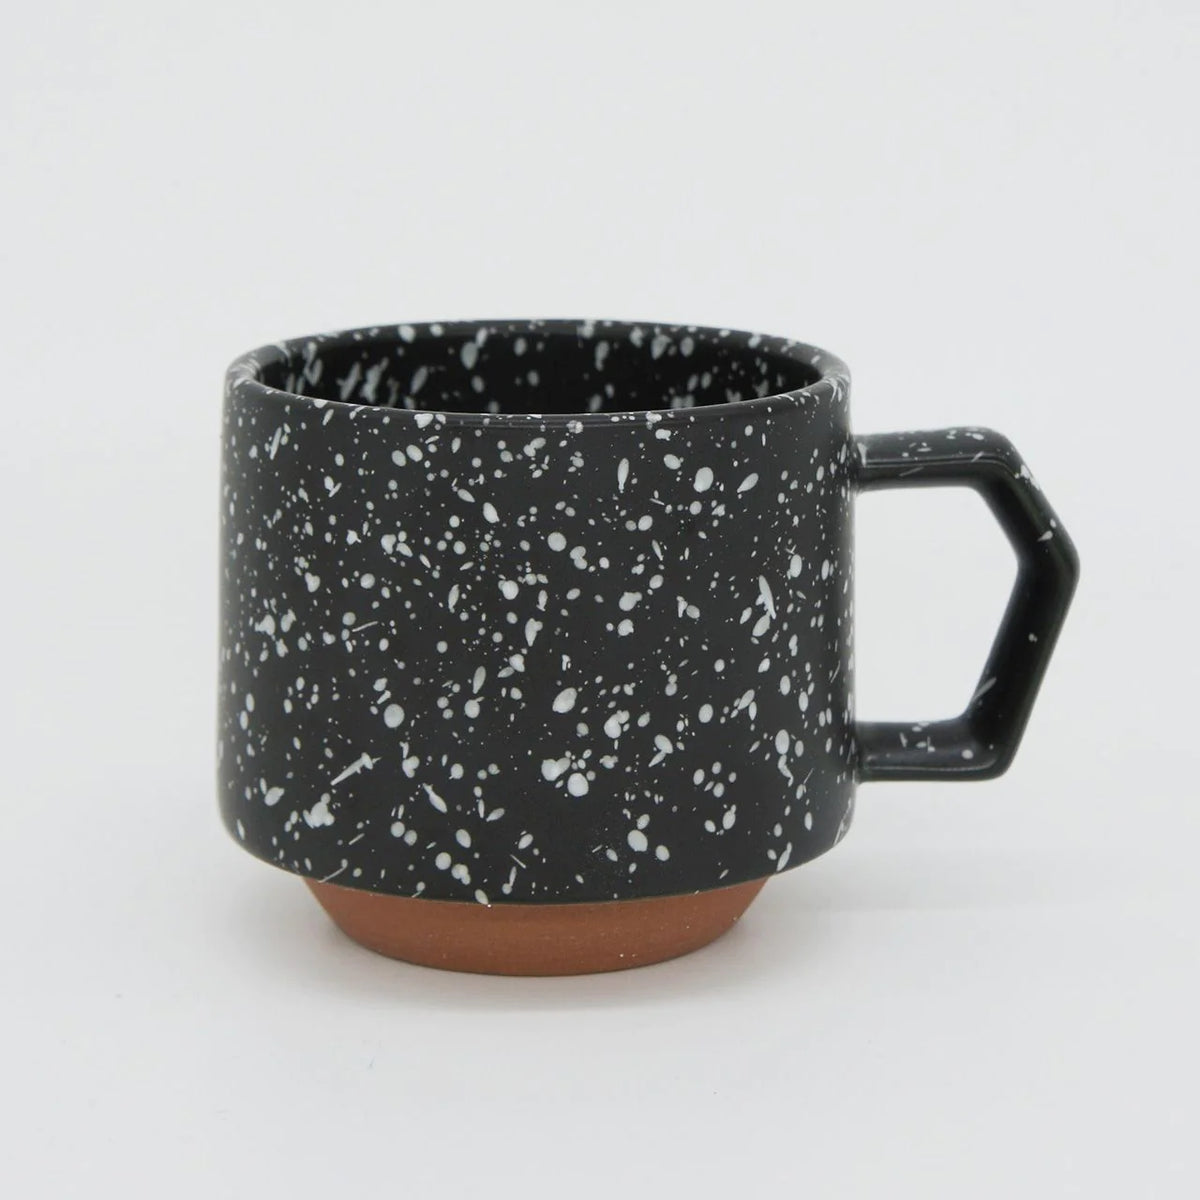 A Stacking Mug – Speckled Black made of porcelain with white speckles on it, manufactured by CHIPS Inc.